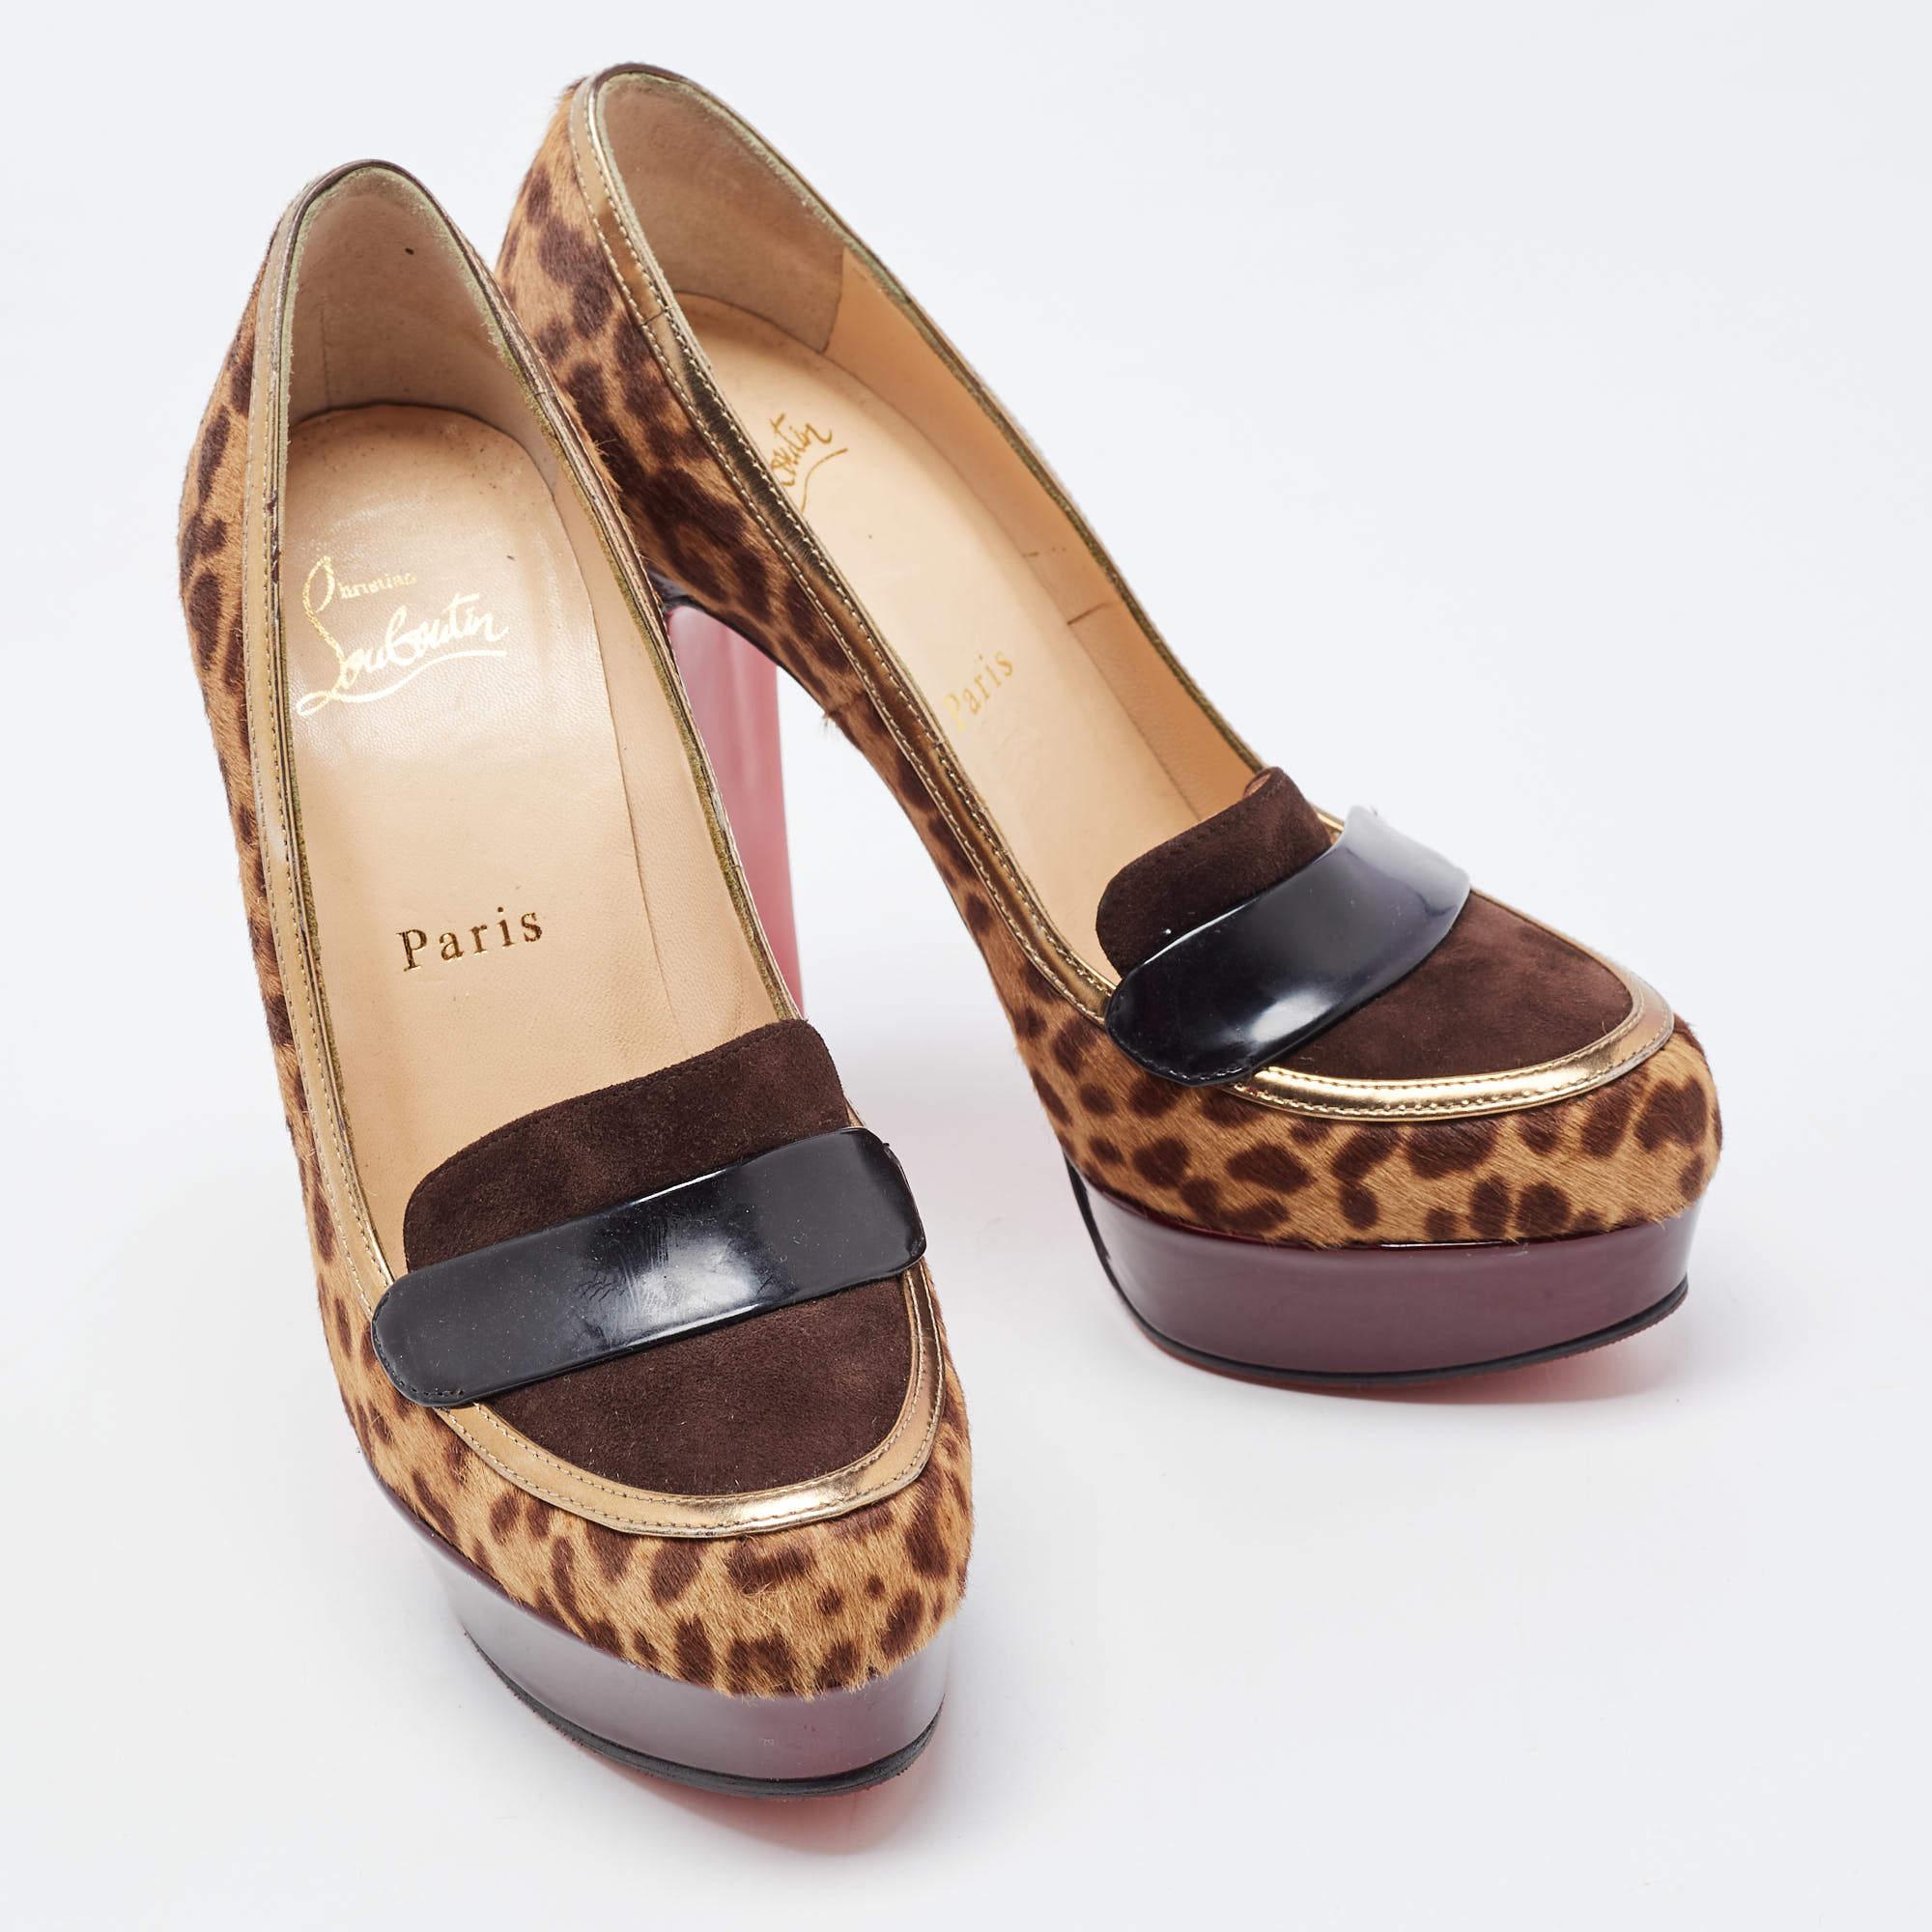 Christian Louboutin Tricolor Animal Print Calf Hair Loafer Pumps Size 36 For Sale 2